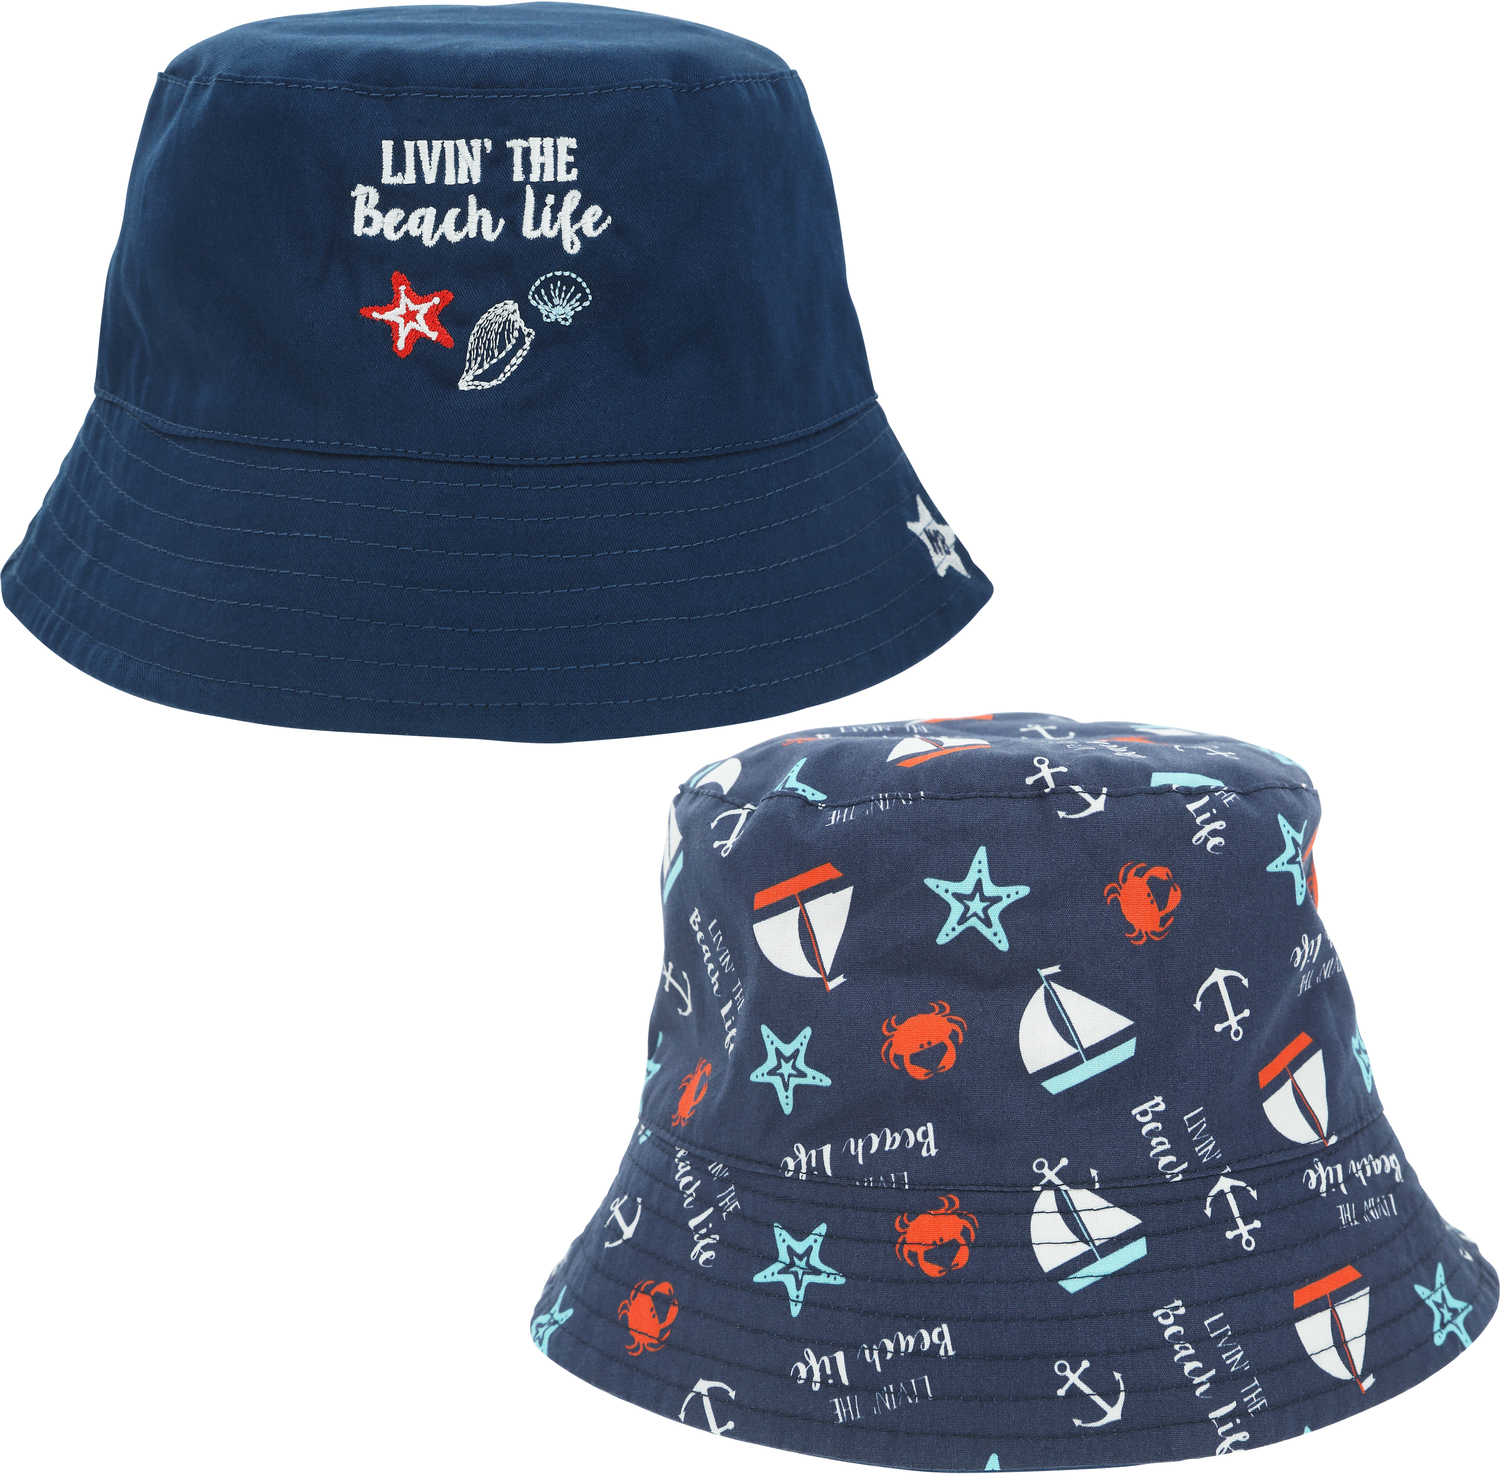 Beach Life by We Baby - Beach Life - Reversible Bucket Hat
6-12 Months